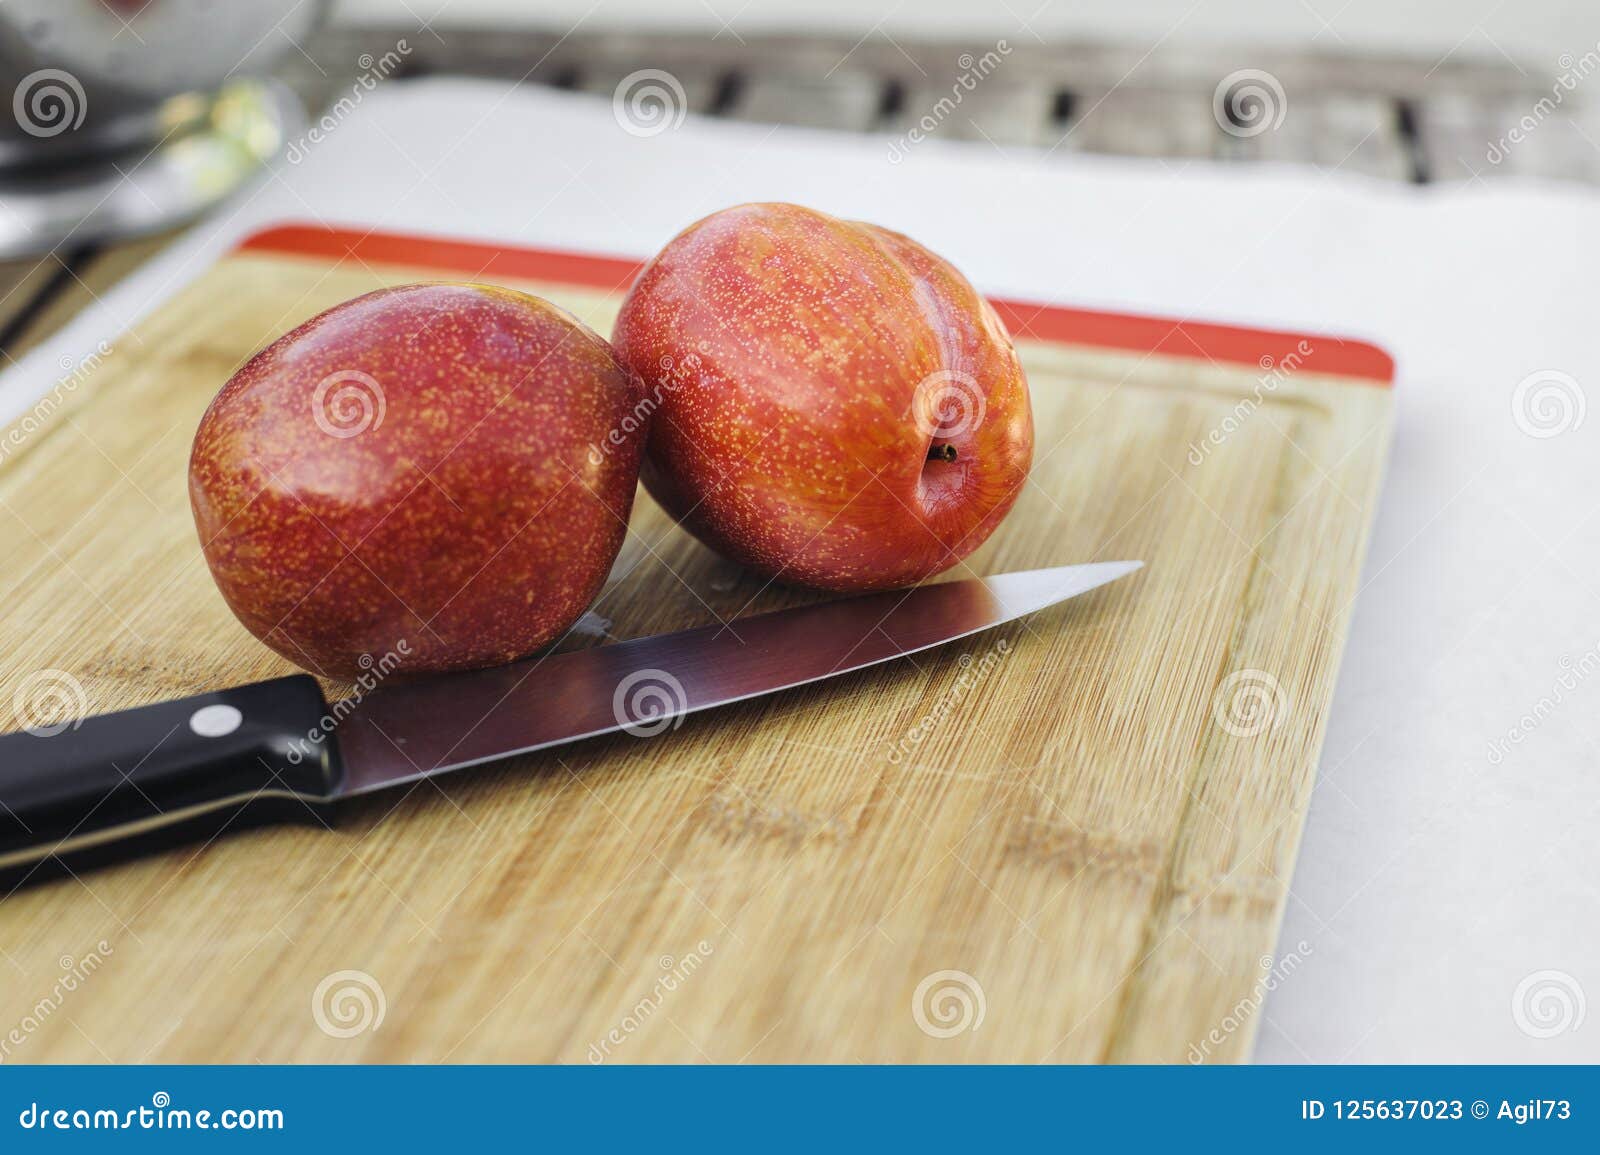 pair of amigo pluots on a wood chopping board with a knife